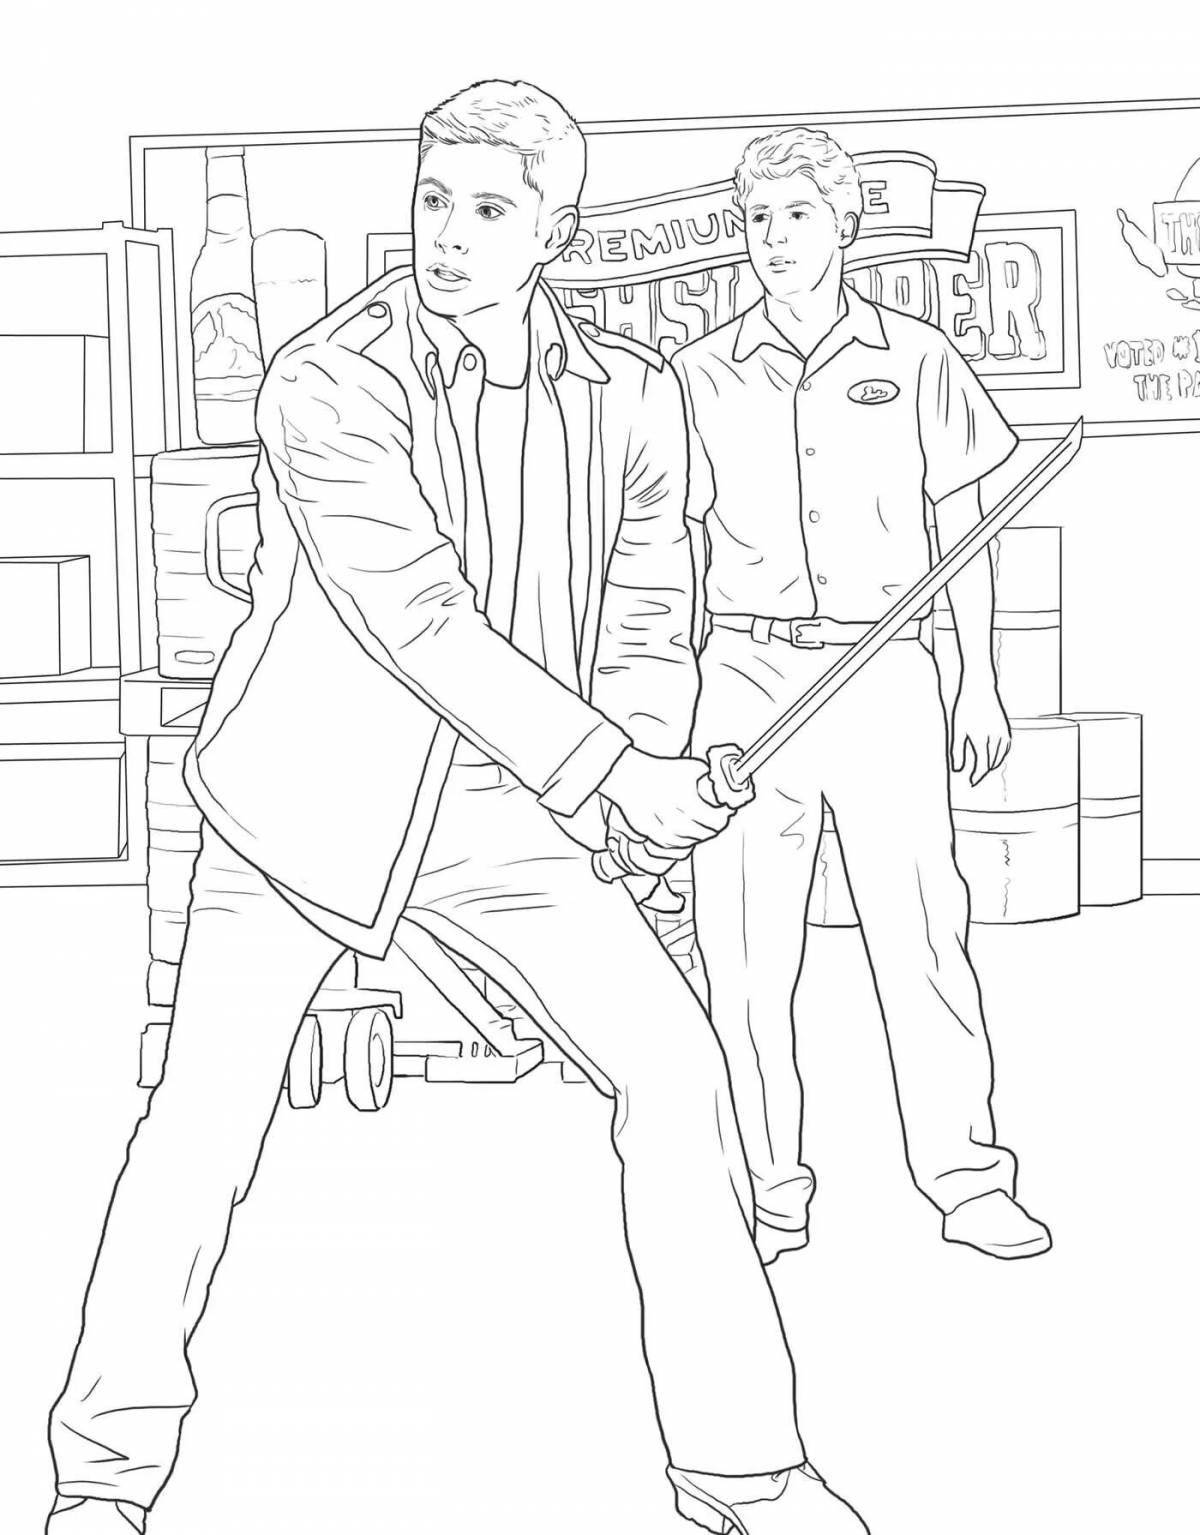 Colorful supernatural academy coloring page